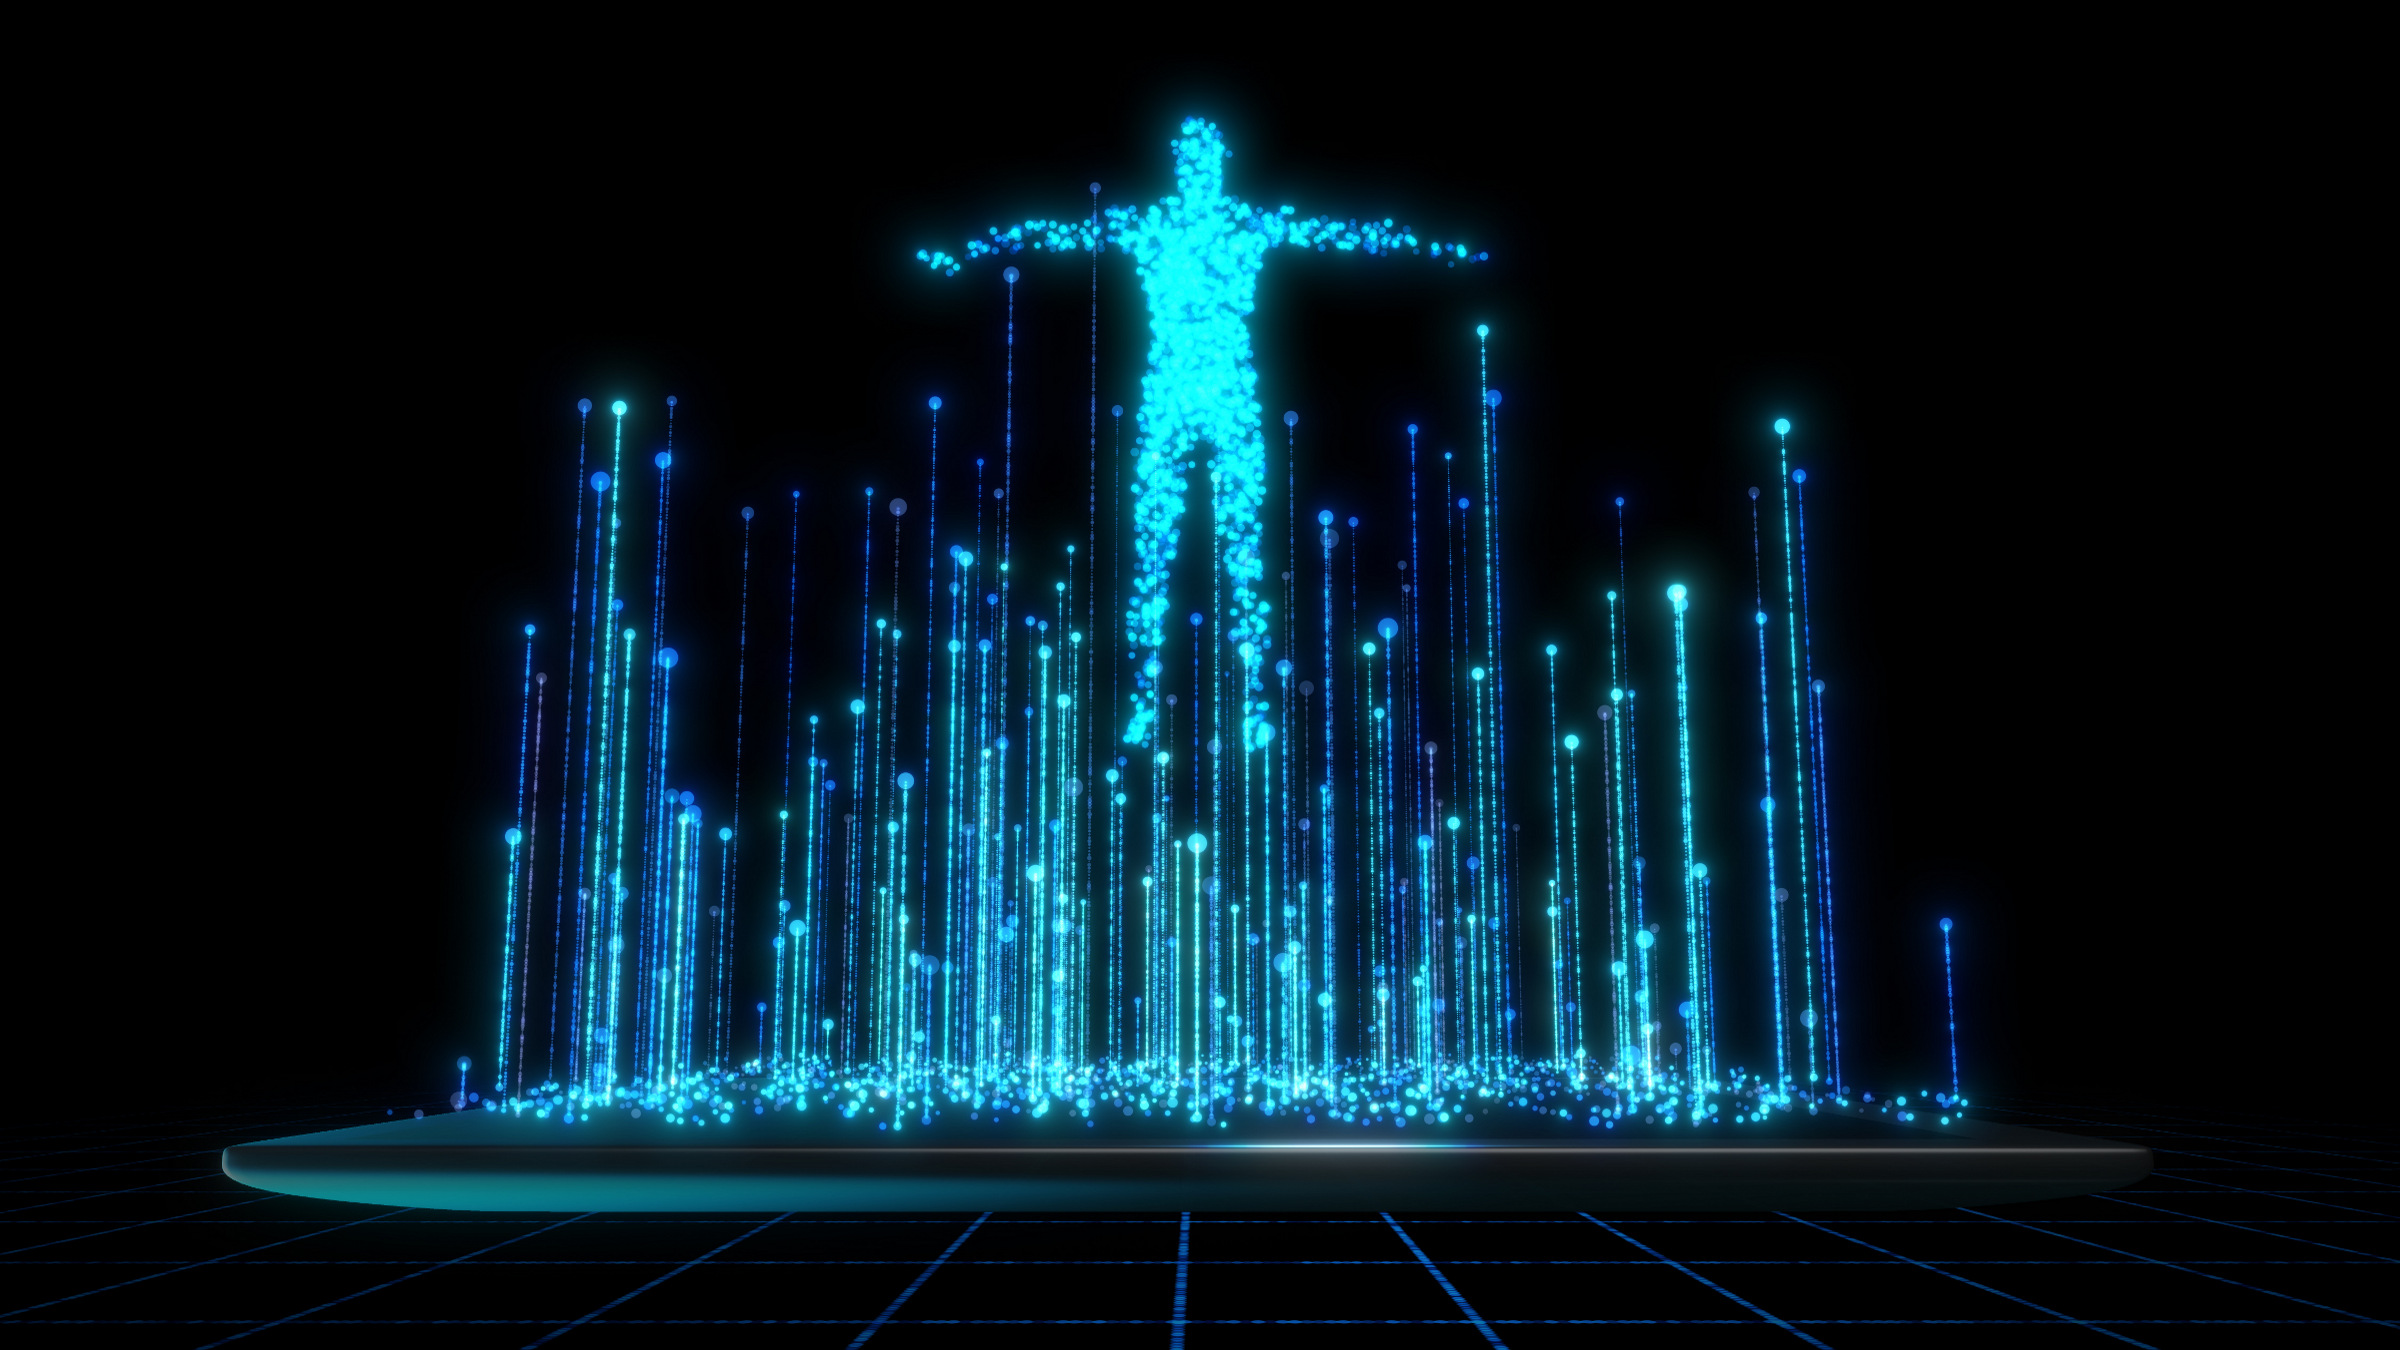 Credit: Getty Images Figure floating amidst vertical beams of light, illustration